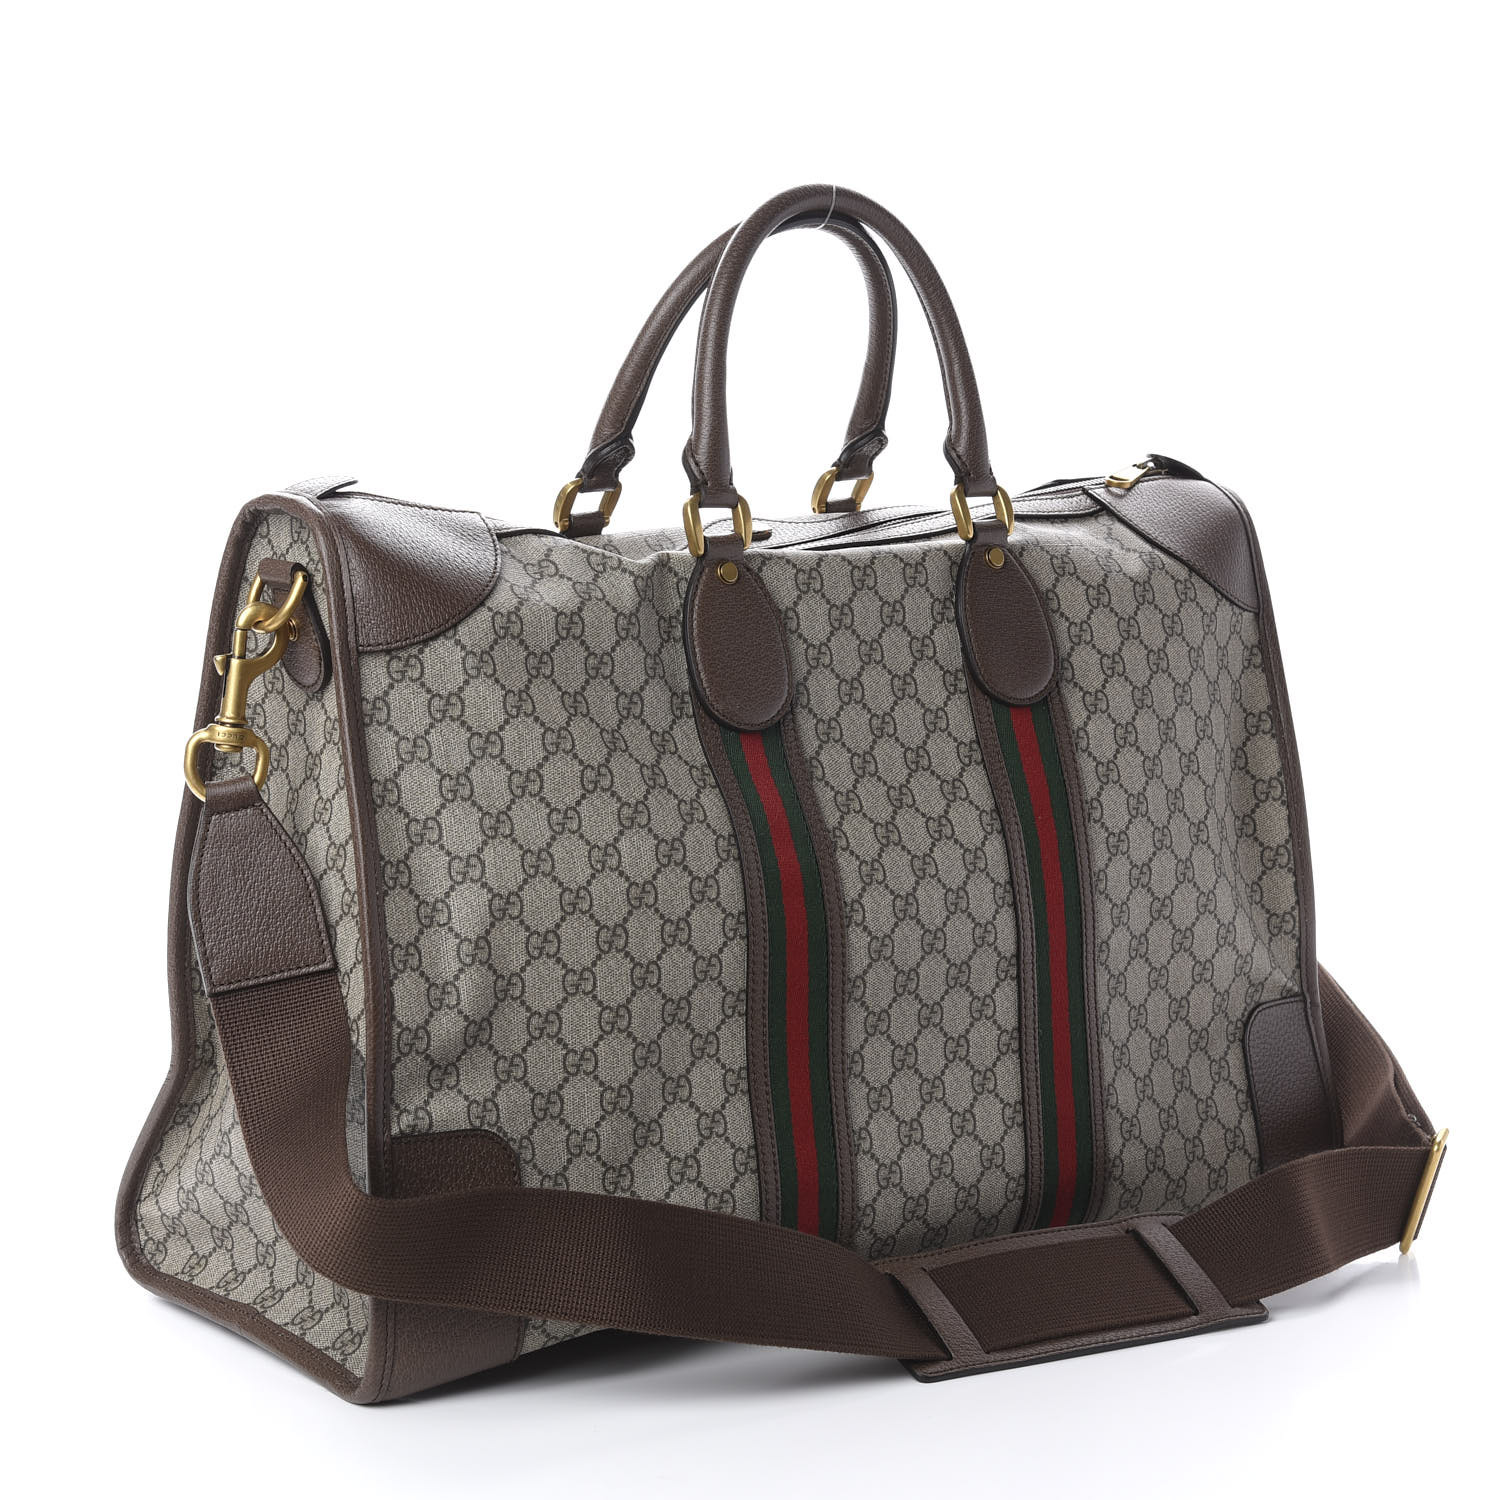 GUCCI GG Supreme Monogram Web Ophidia Large Carry-On Duffle Bag Brown 575925